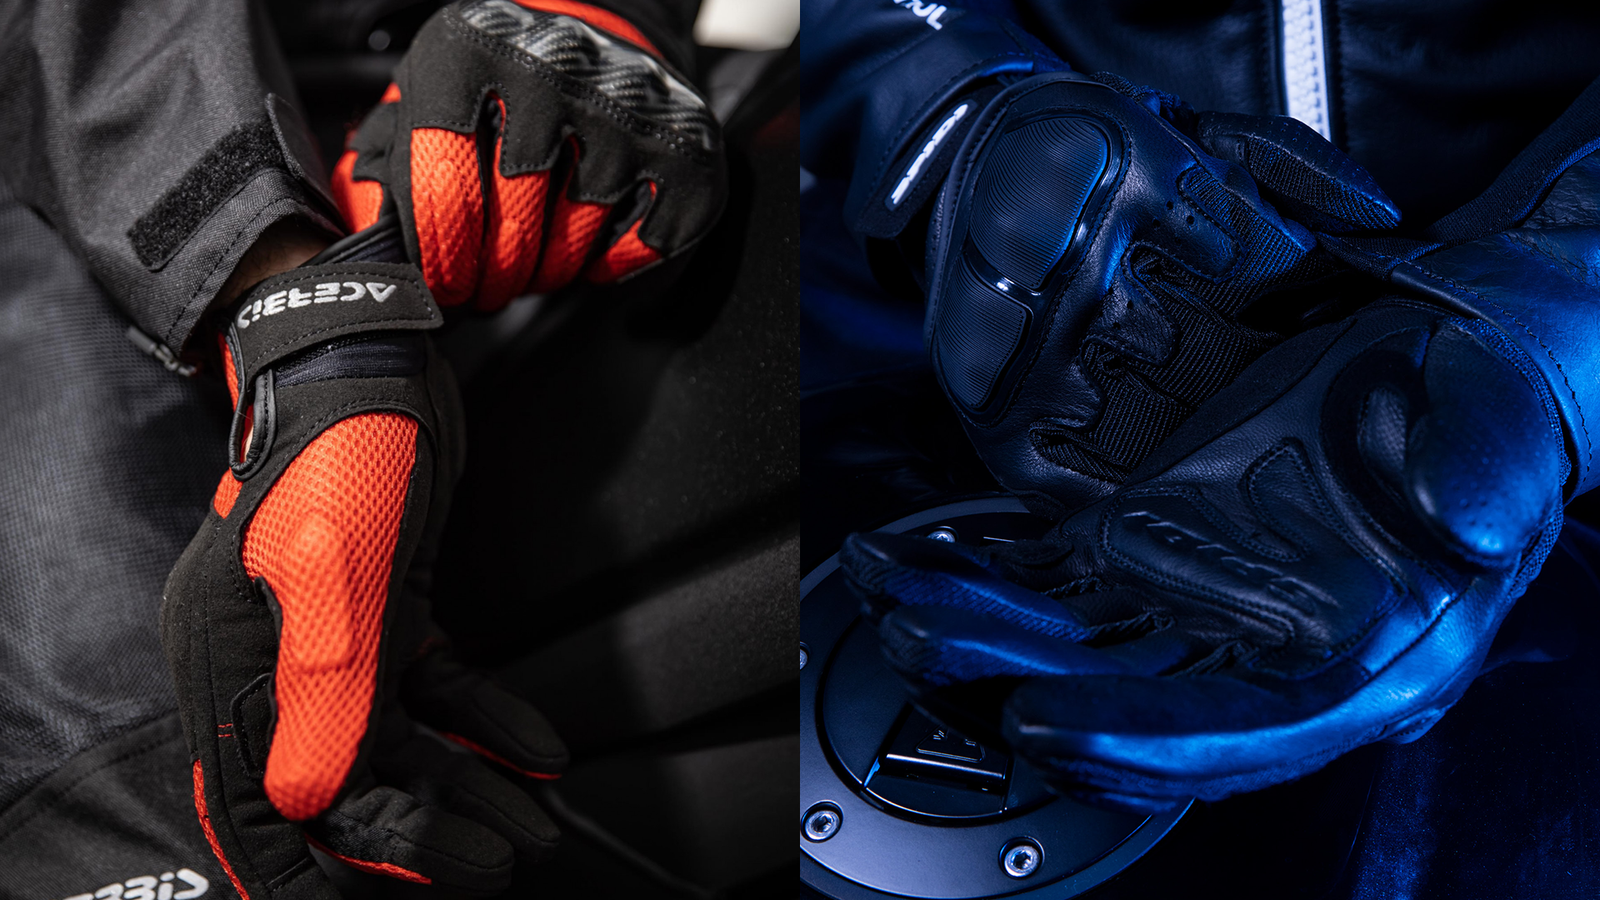 Choosing the Right Material for Your Motorcycle Gloves: Leather vs. Textile